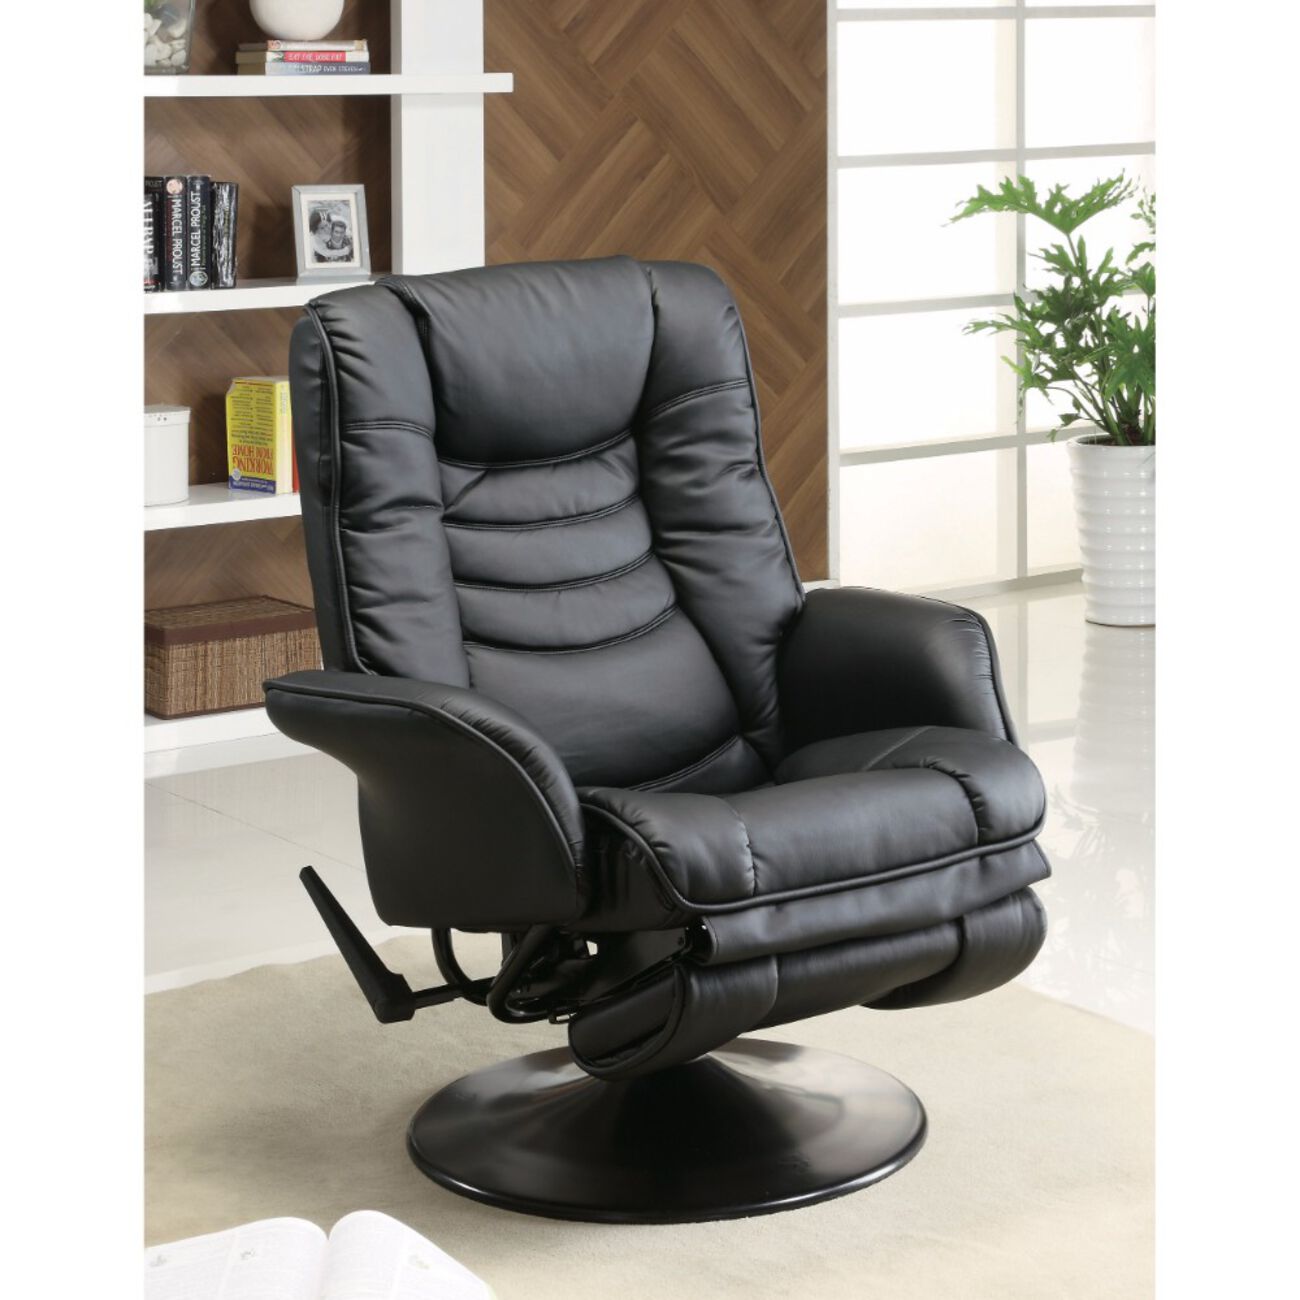 Opulently Functional Glider Chair, Black